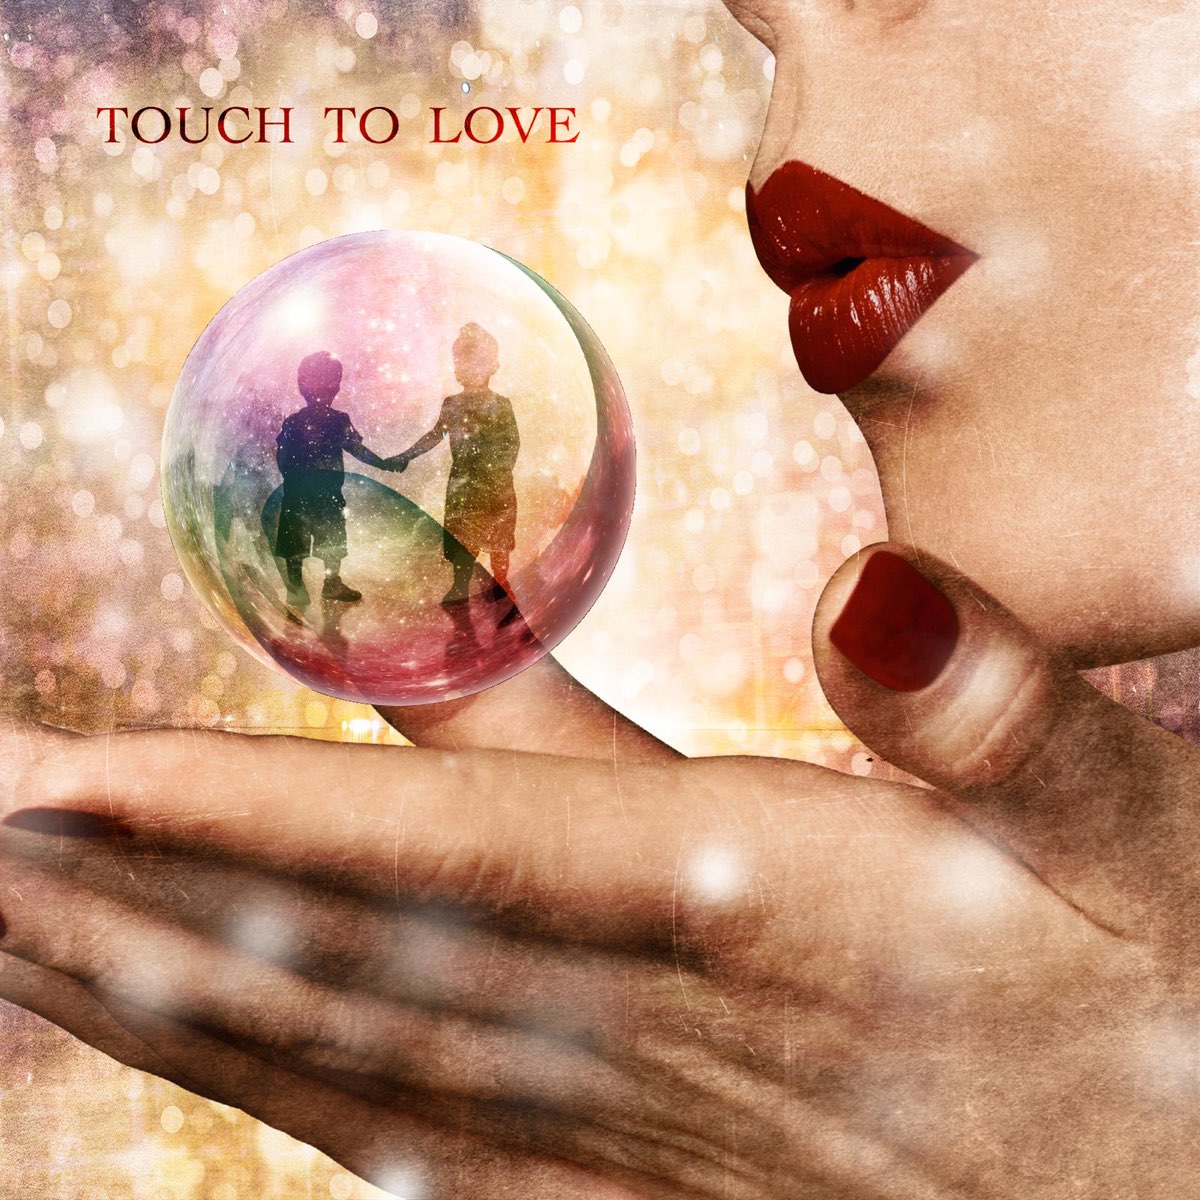 Featuring love. A Touch of Love. To Touch. To Touch смысл. Love to Love Touch me.